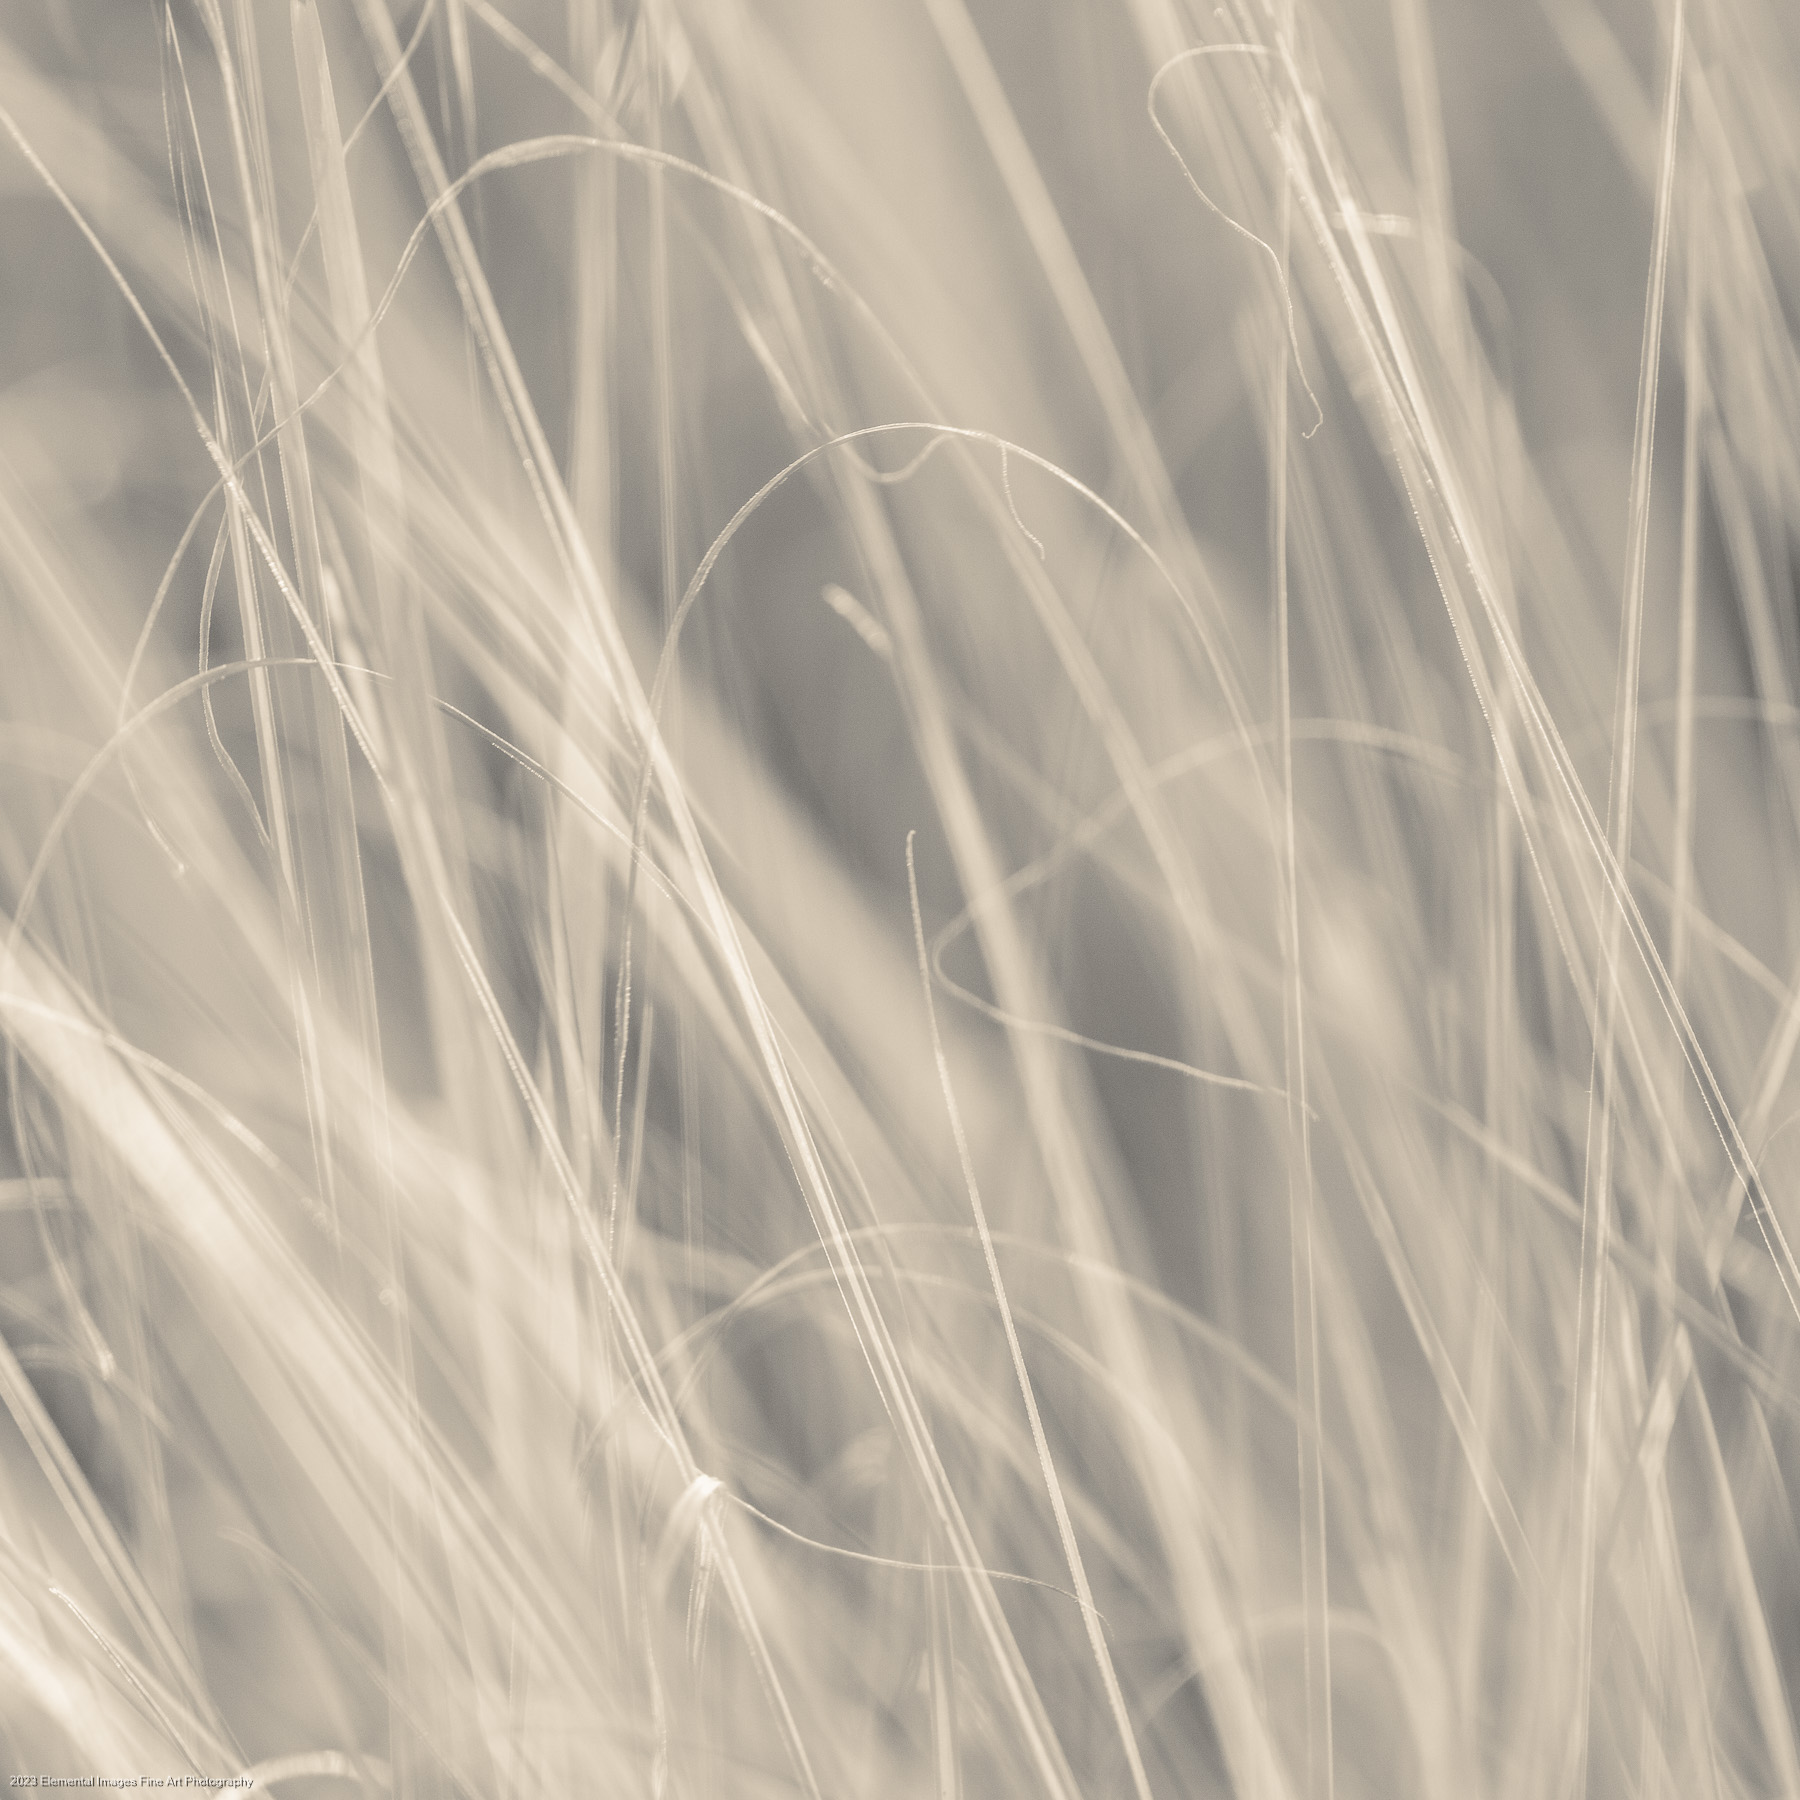 Grasses #191 | Portland | OR | USA - © 2023 Elemental Images Fine Art Photography - All Rights Reserved Worldwide